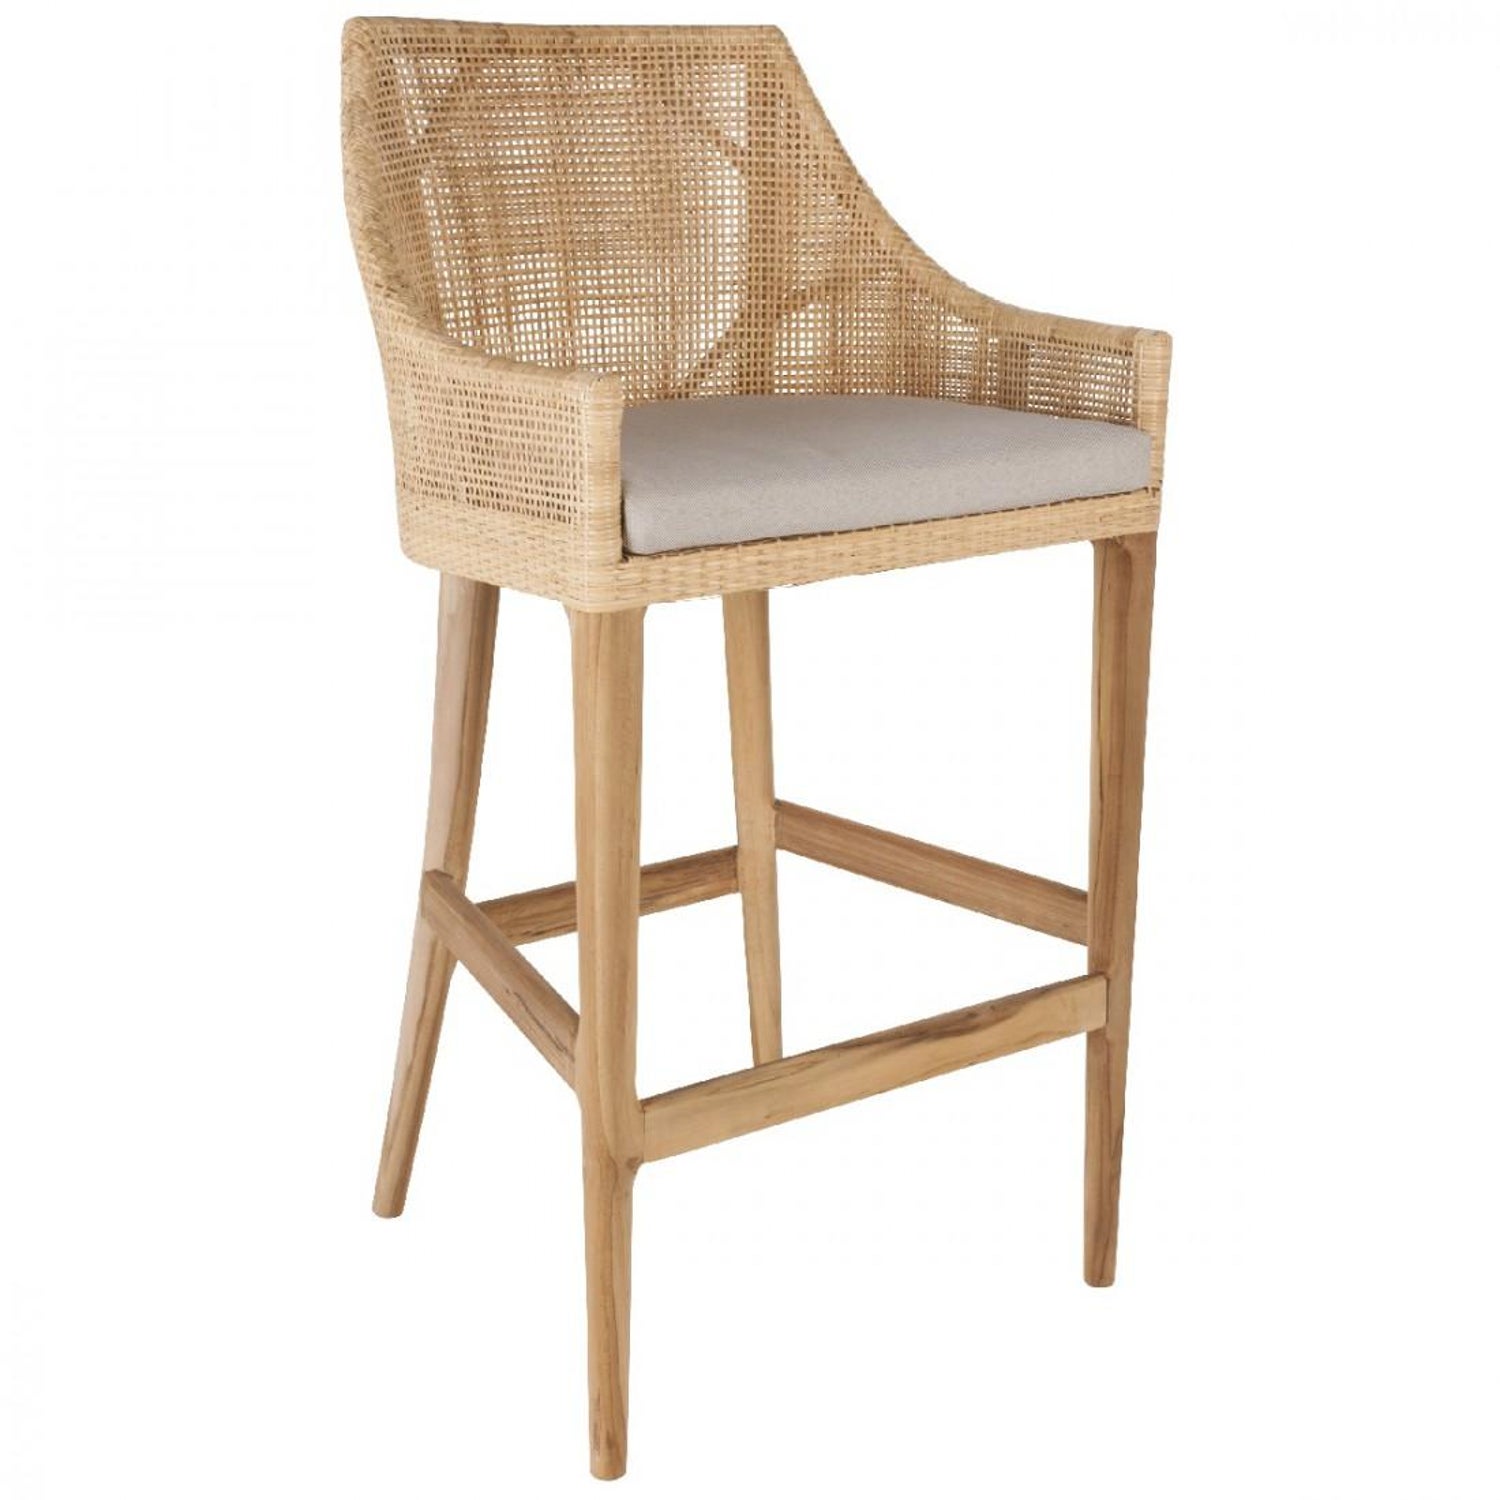 Wooden Teak And Rattan Bar Stool For, Wicker Bar With Stools